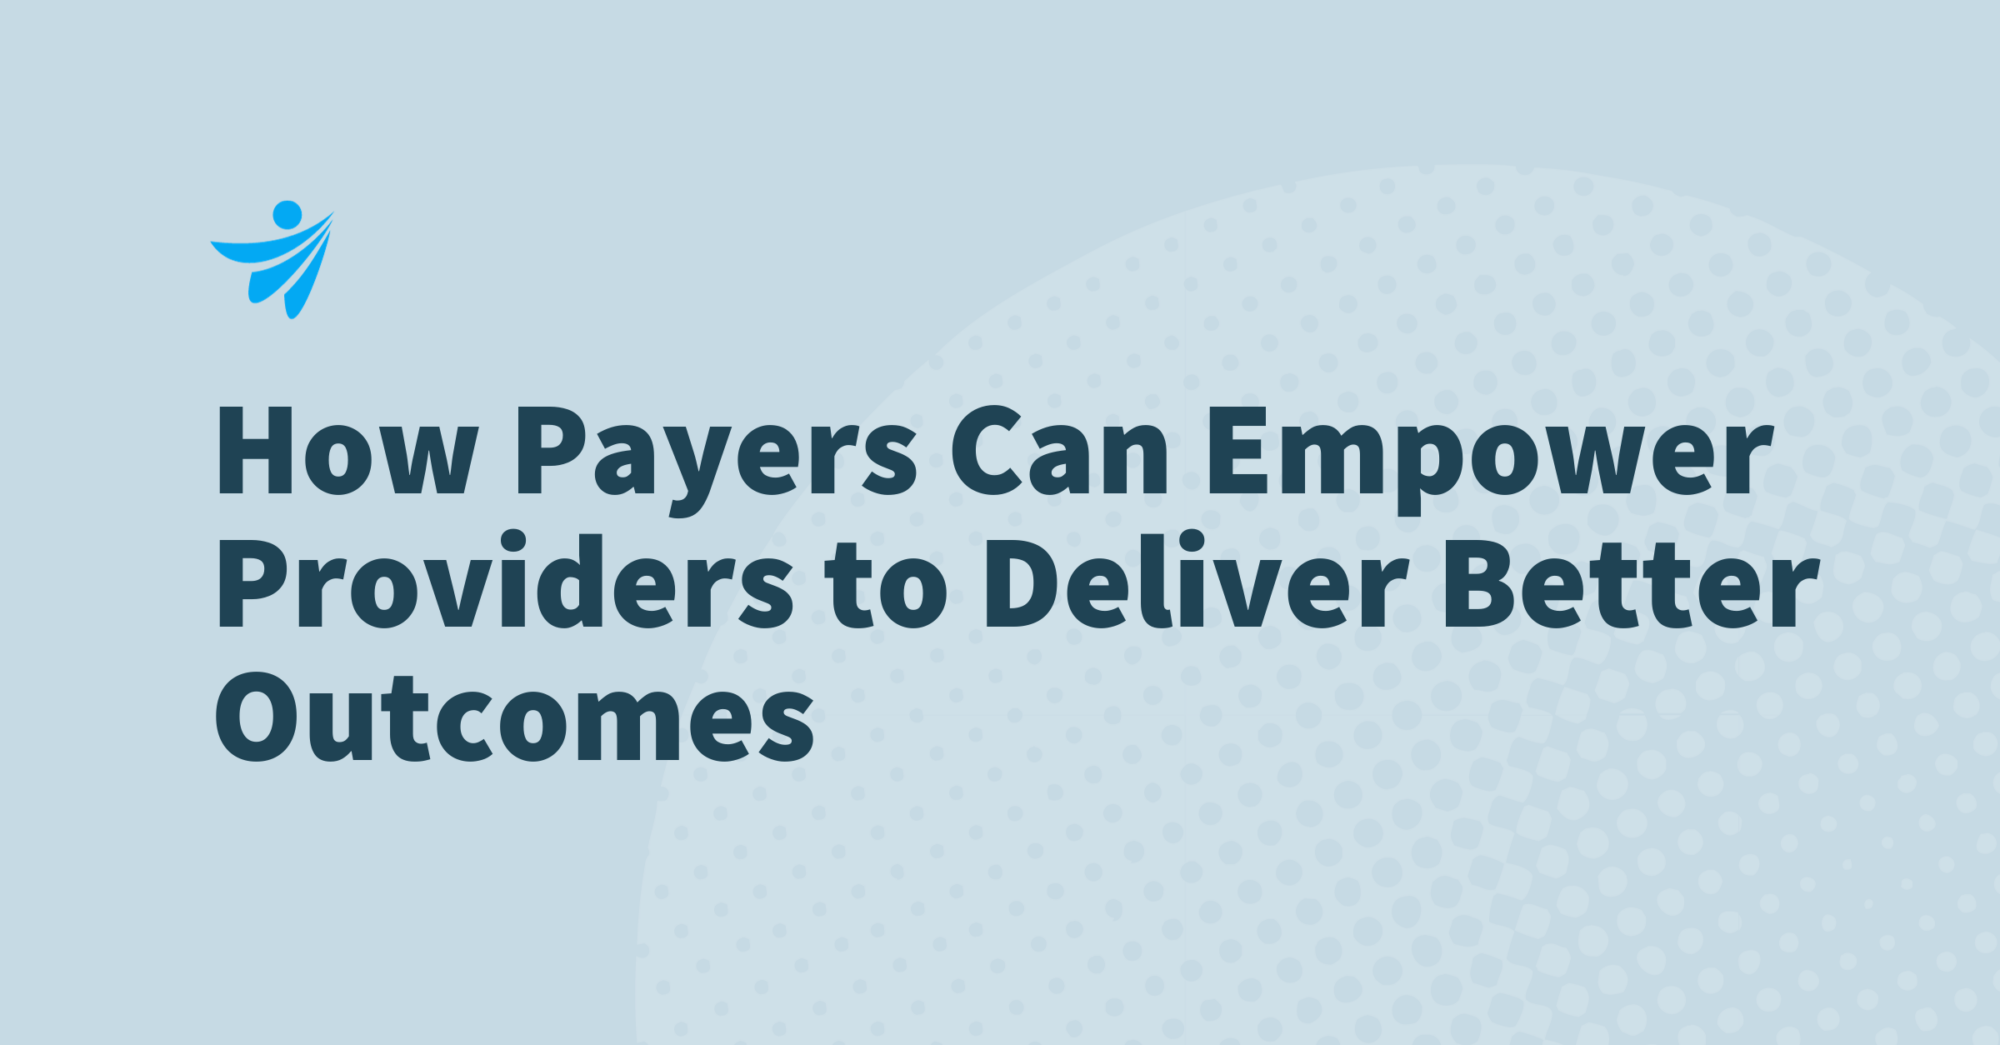 Thumbnail for Value-Based Care: How Payers Can Empower Providers to Deliver Better Outcomes